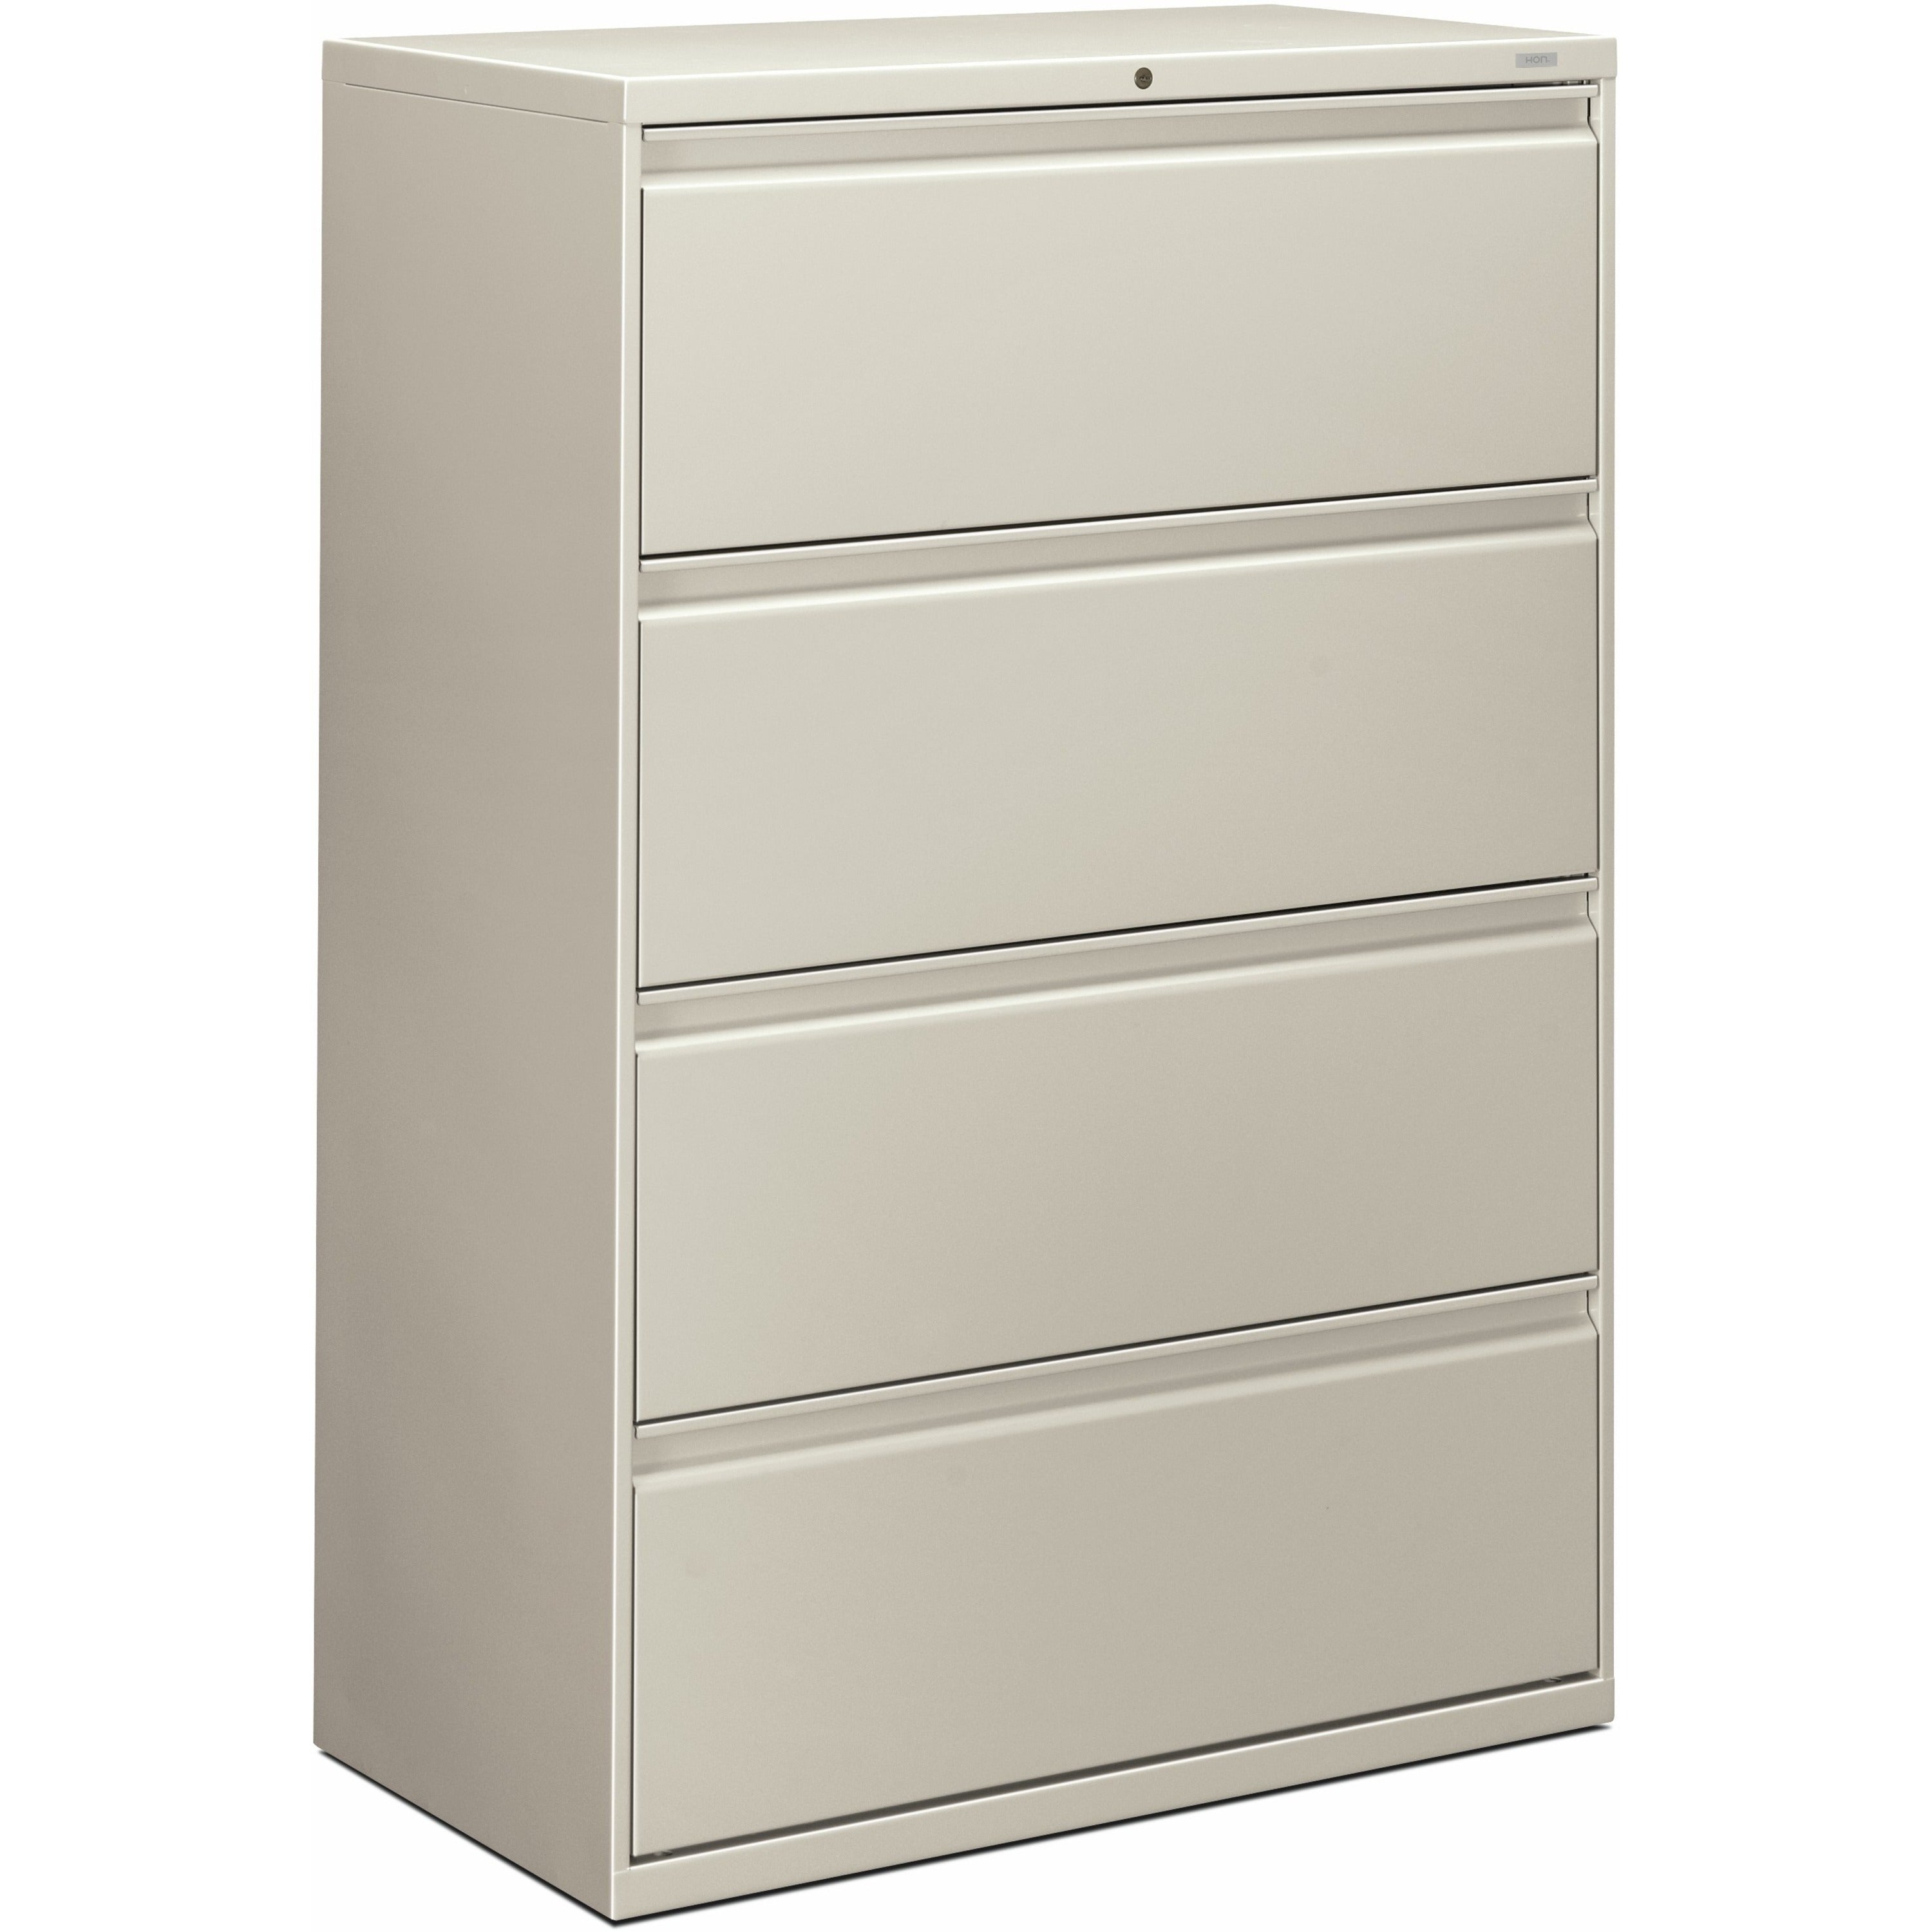 HON Brigade 800 H884 Lateral File - 36" x 18"53.3" - 4 Drawer(s) - Finish: Light Gray - 